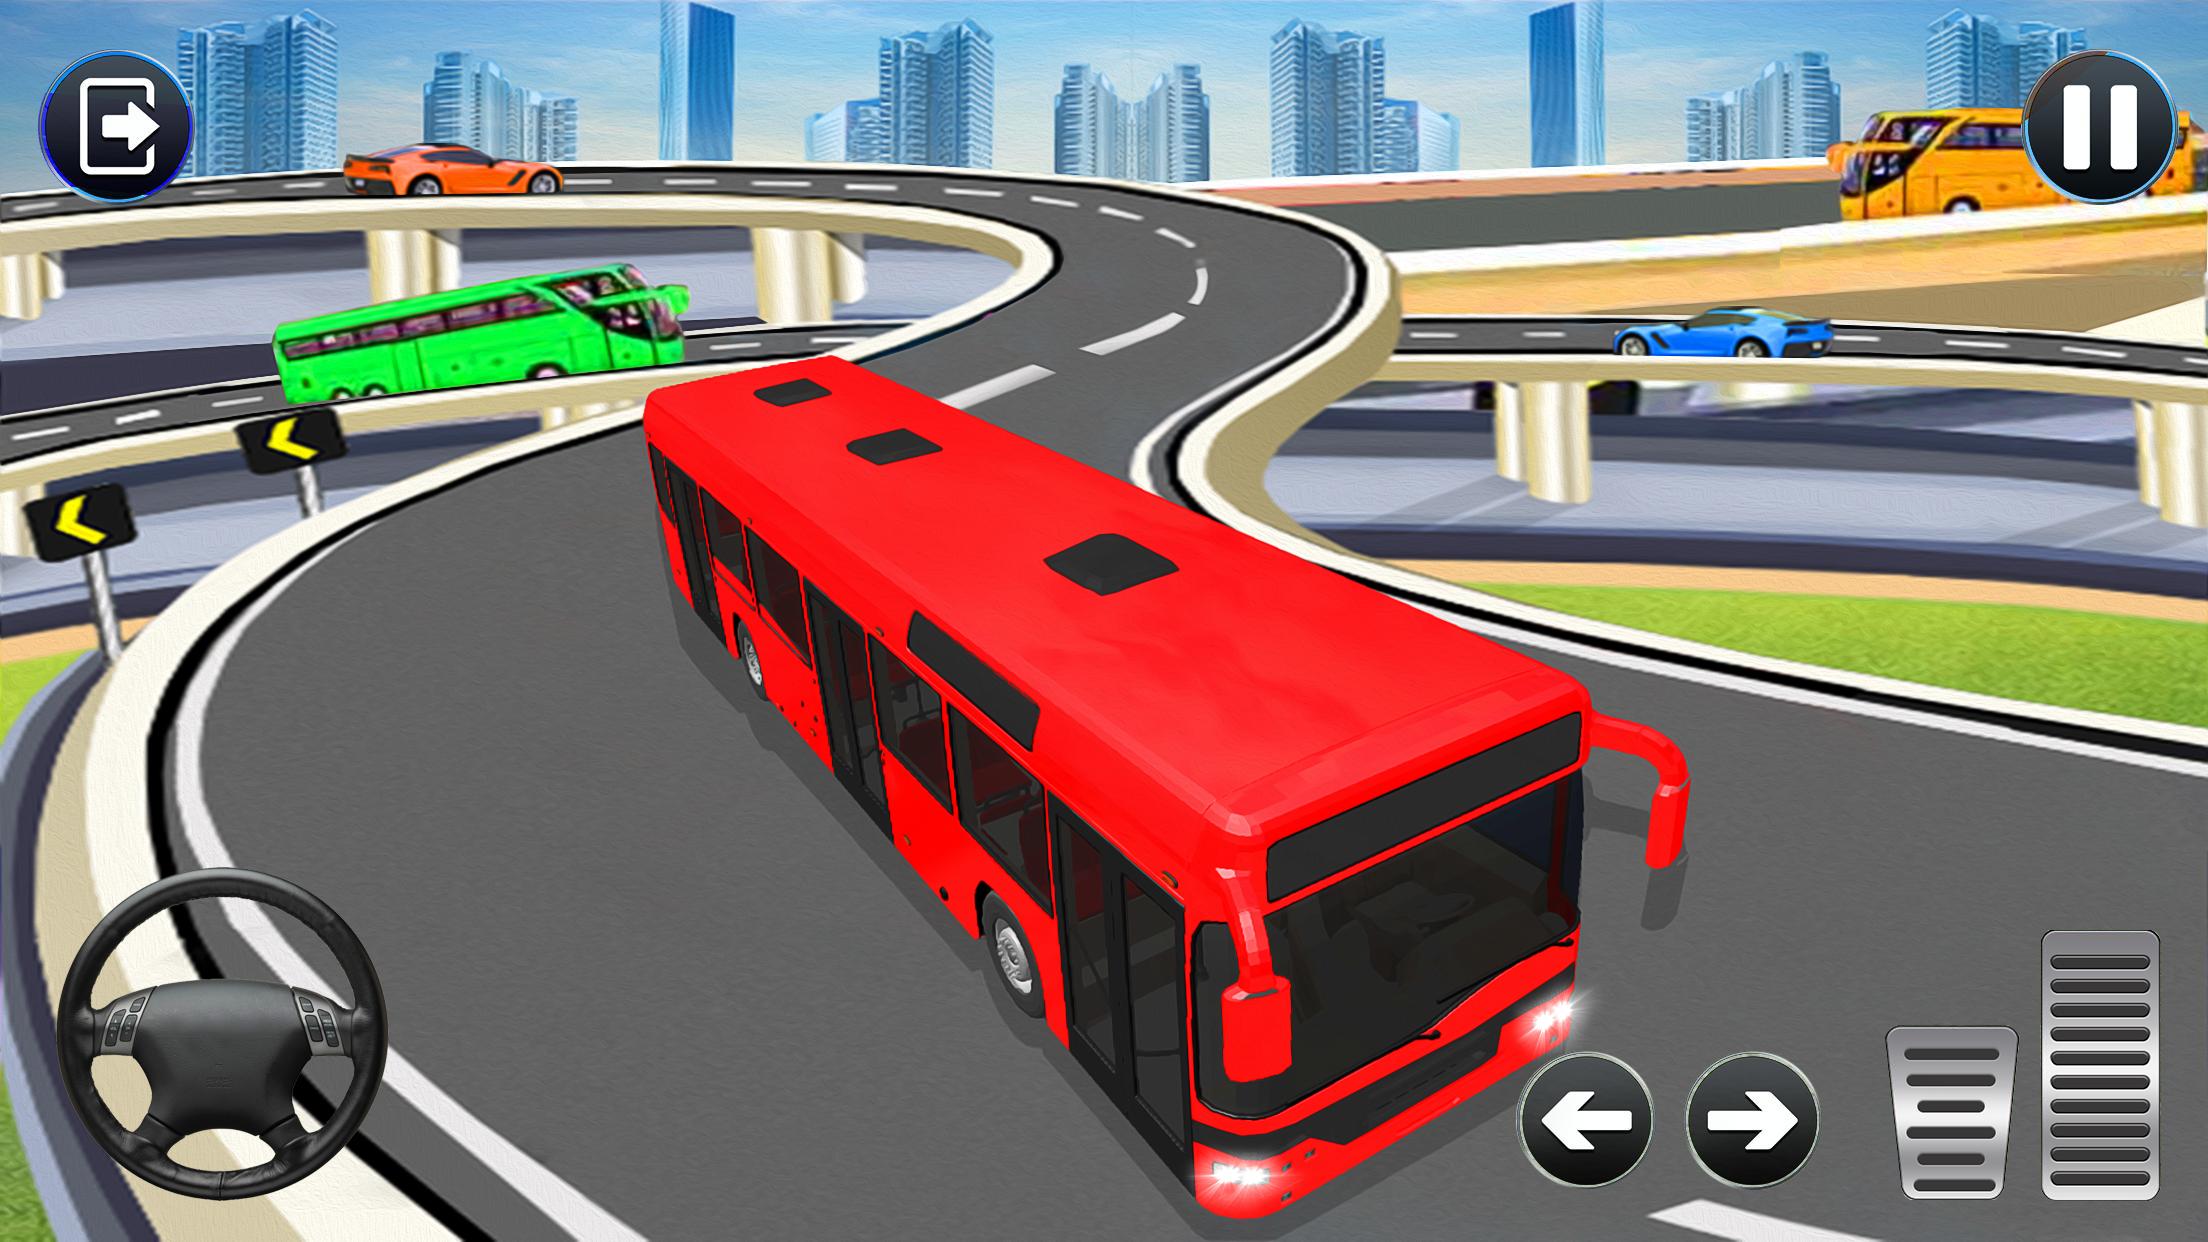 Crazy Coach Bus Simulator 2020 for Android - APK Download